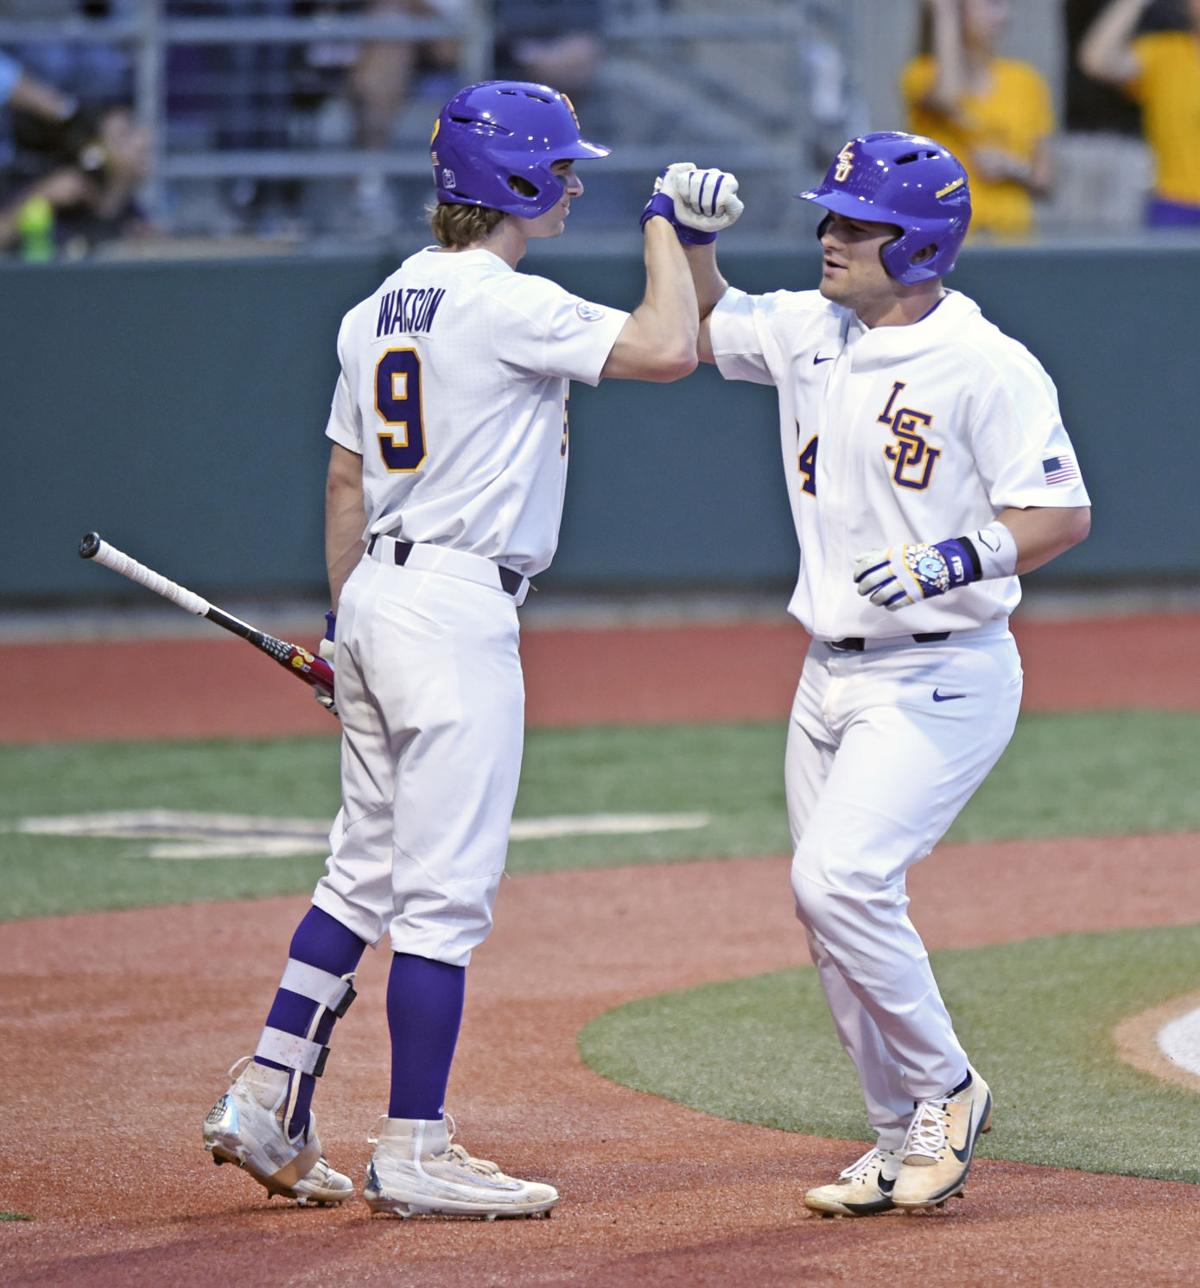 LSU baseball in the rankings: Tigers (mostly) on the rise after an